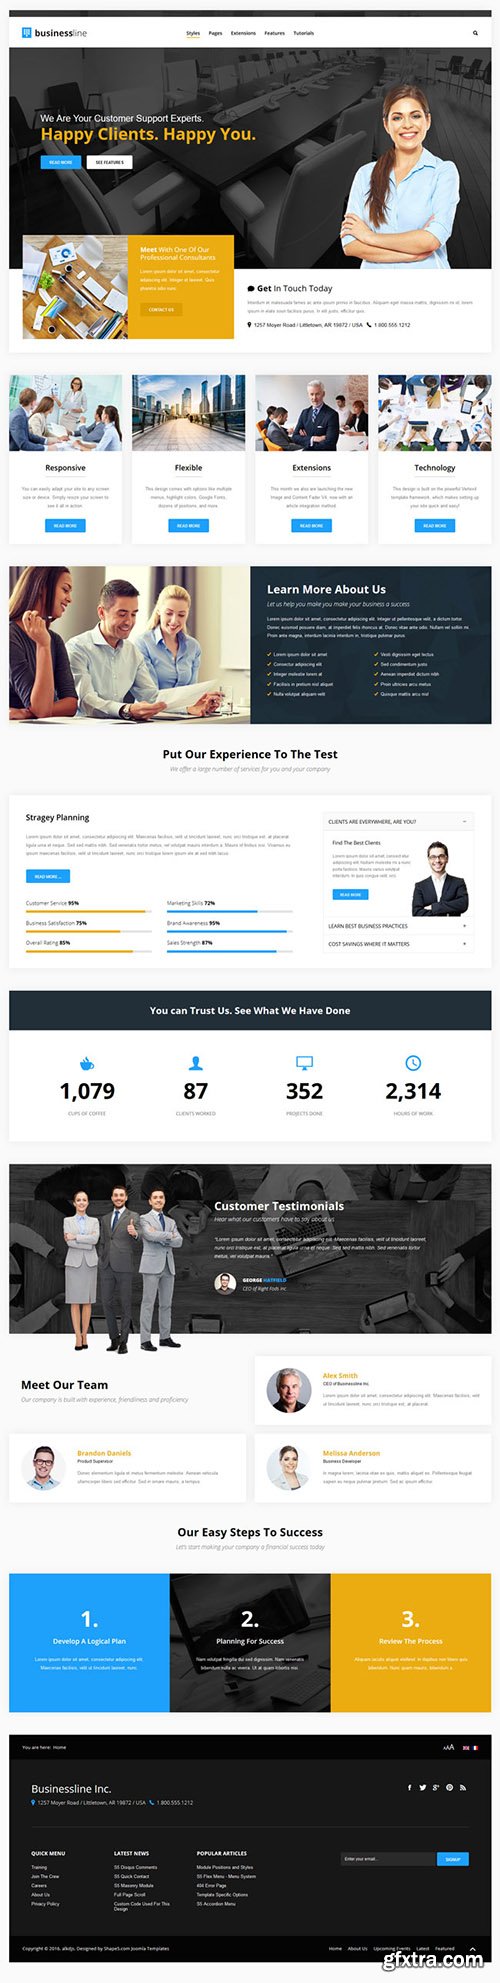 Shape5 - Business Line v1.0.0 - Corporate And General Business Joomla 3.x Template